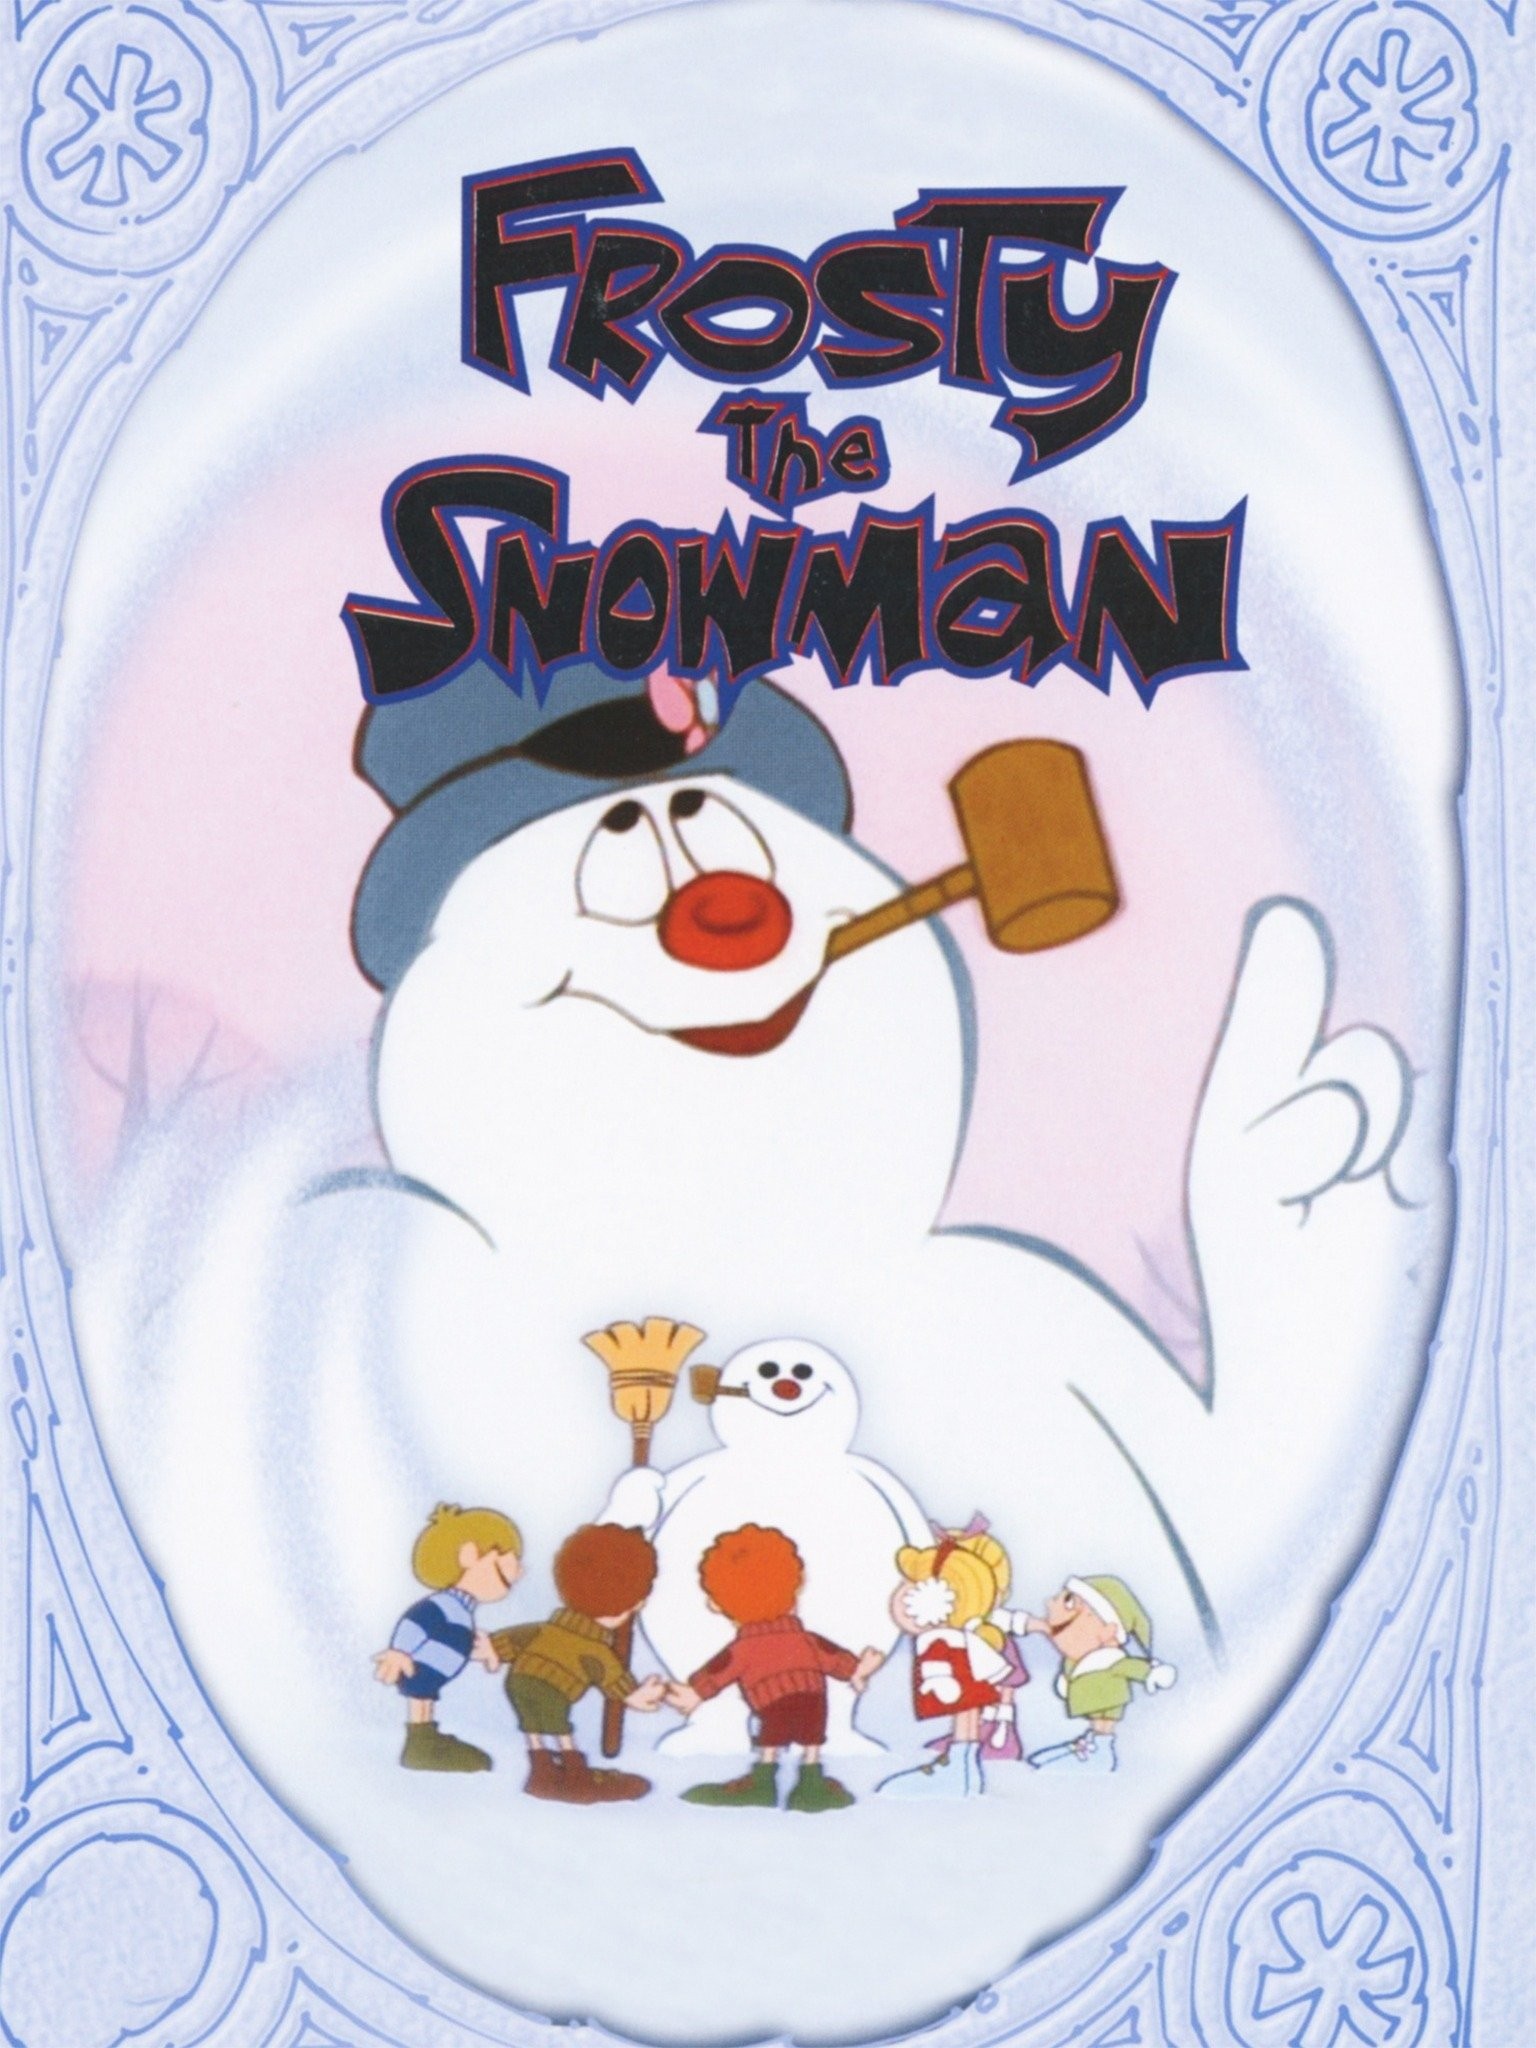 dave jah recommends Snowman Full Movie Online